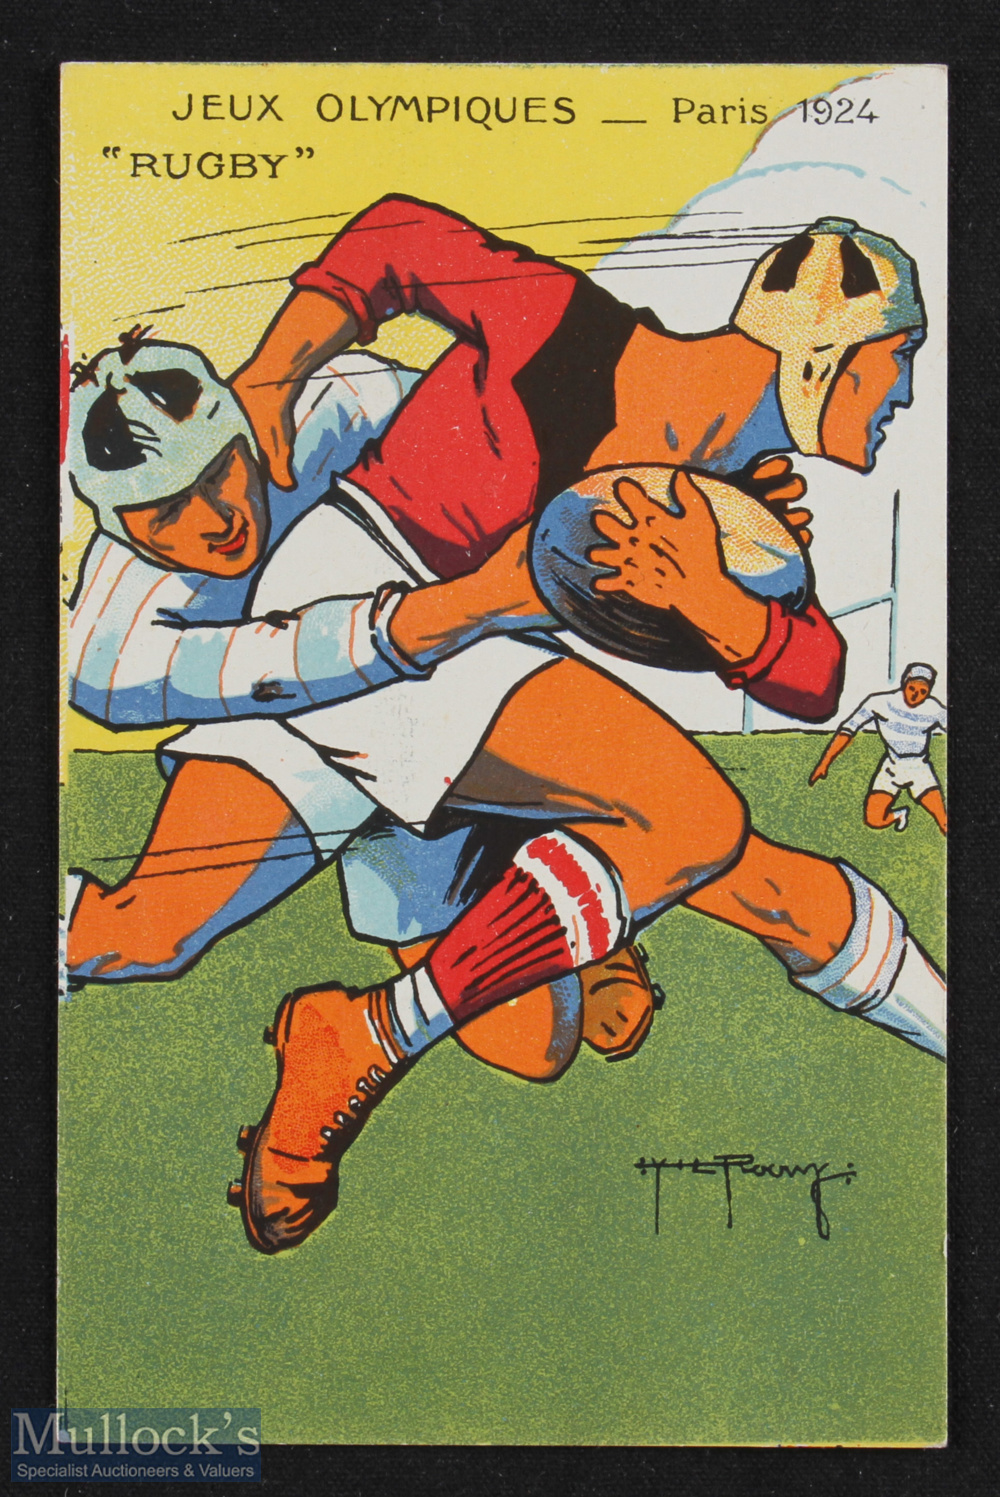 1924 Olympics Rugby Postcard: Unused, well known but comparatively crisp and brightly coloured